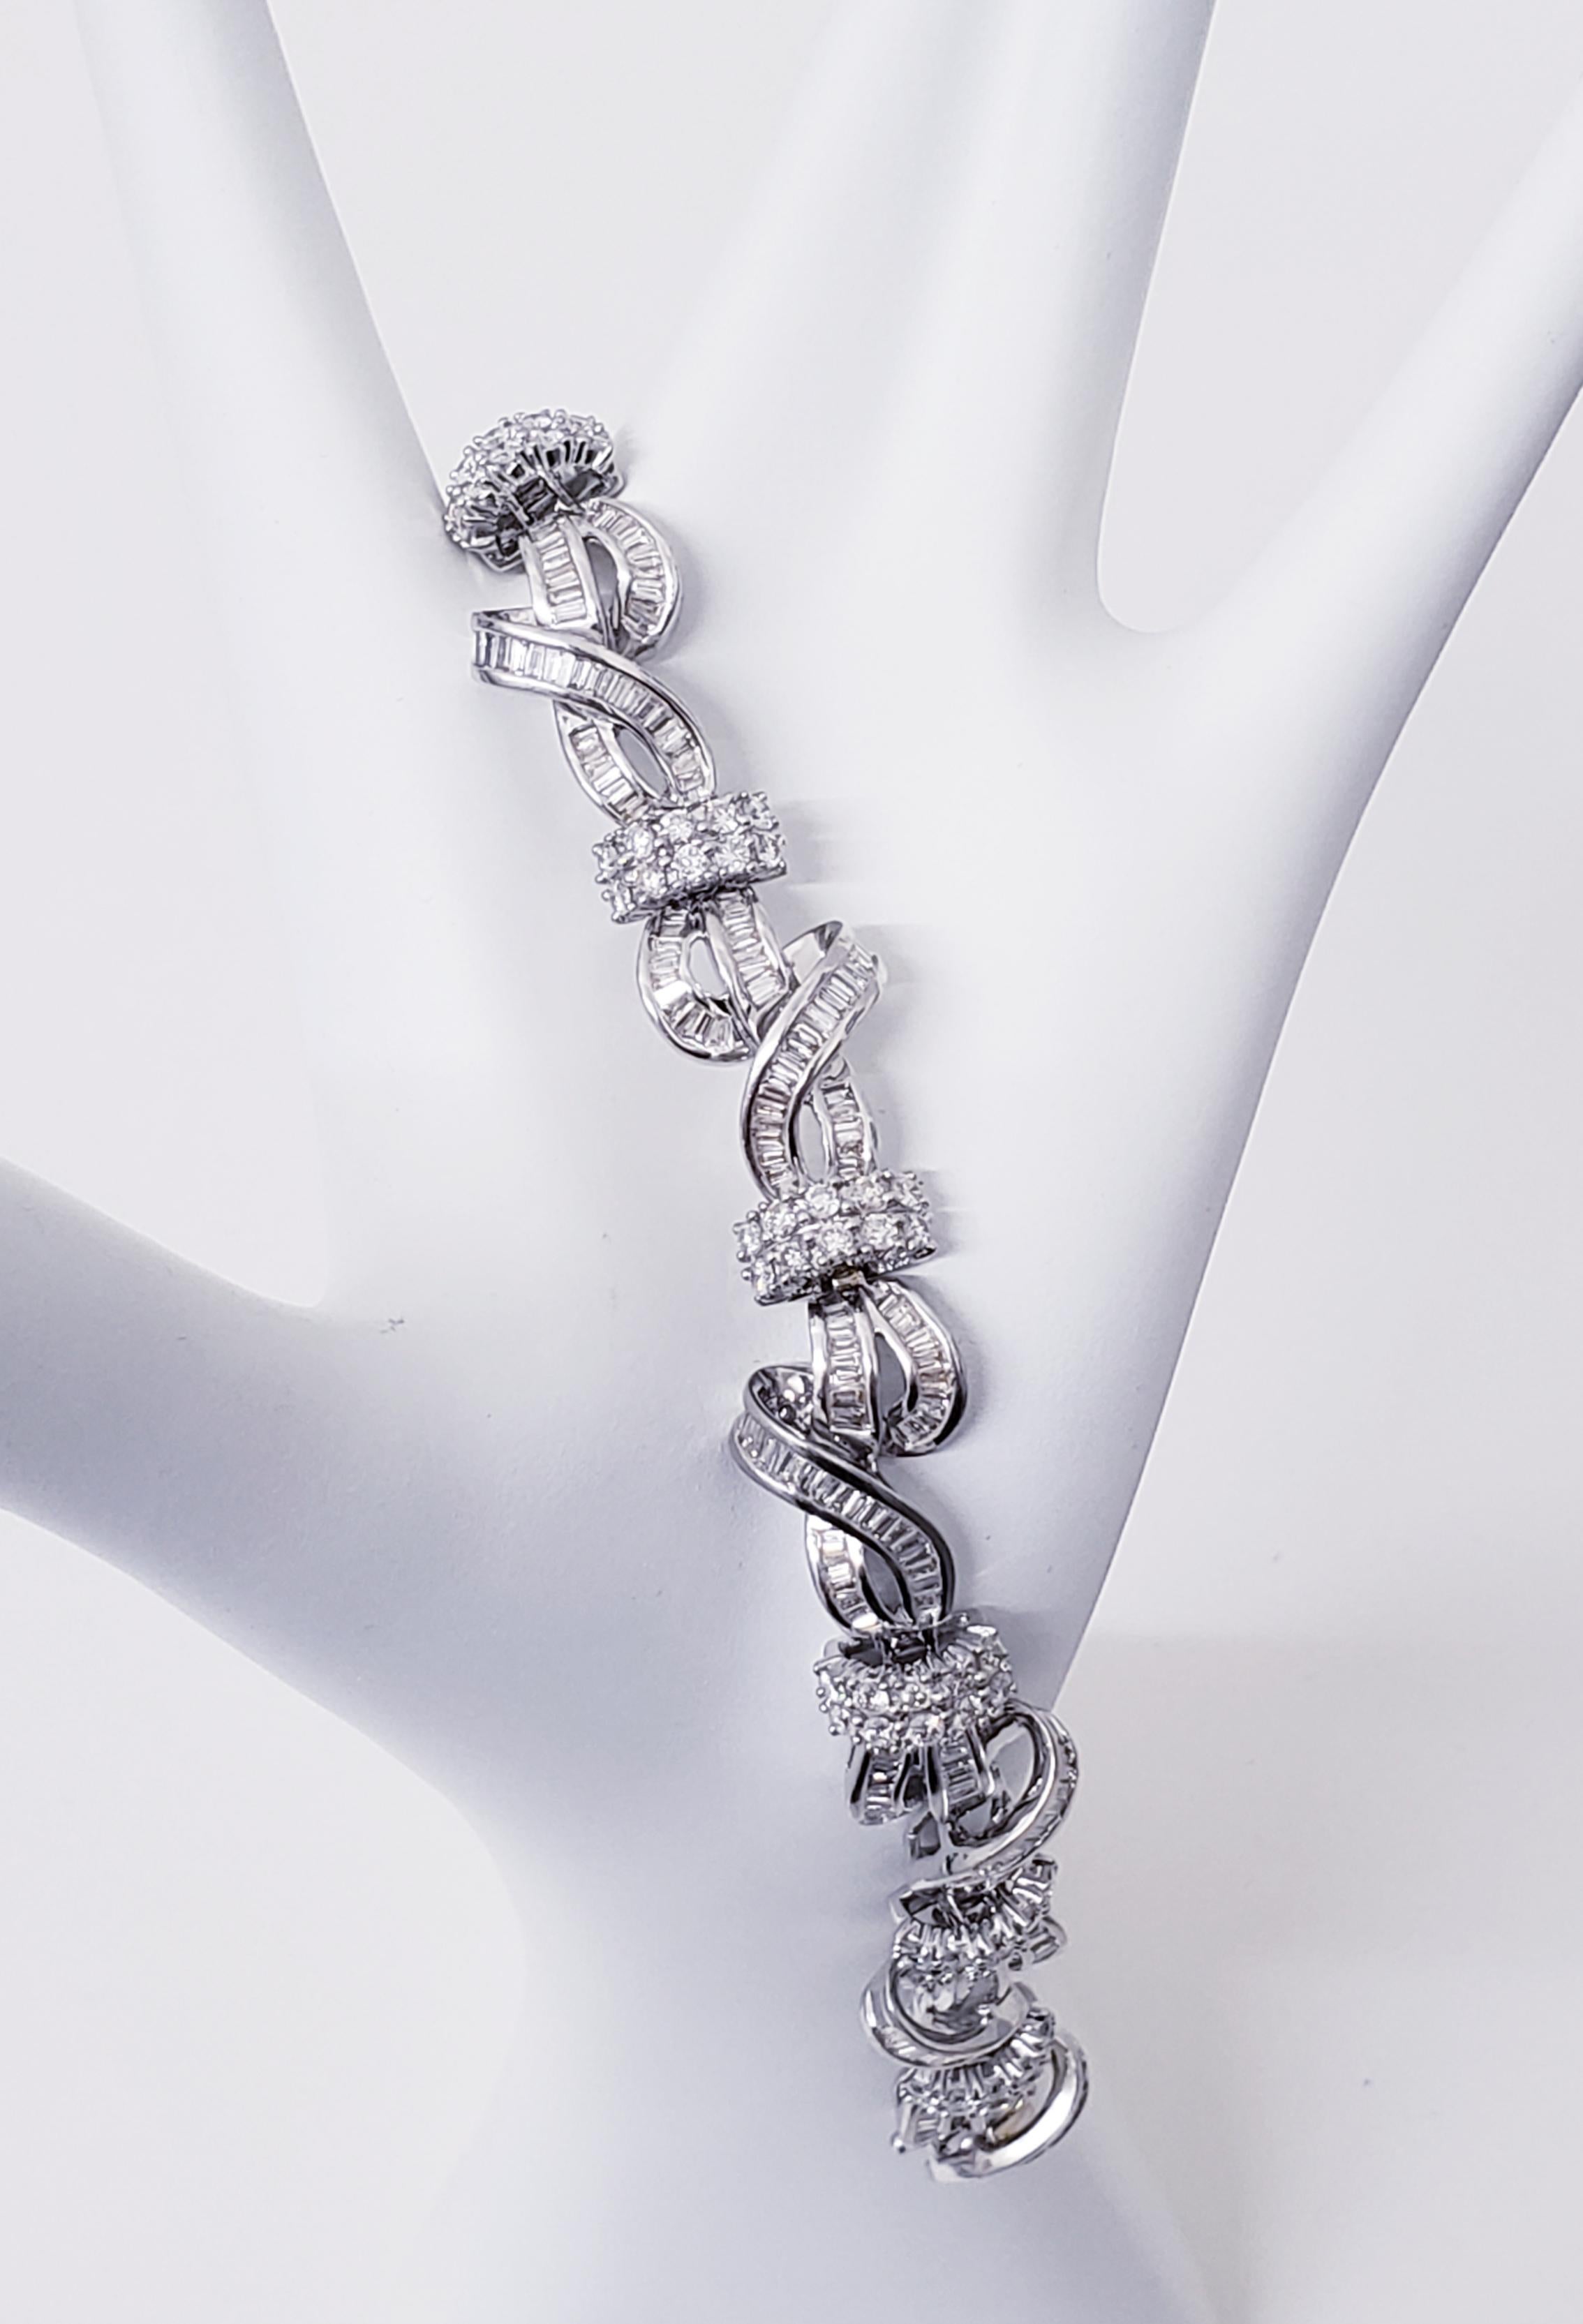 Vintage diamond bracelet in 14k white gold featuring 12.25TCW in round & baguette diamonds.
Swirls all around fully loaded with diamonds throughout. Gorgeous luxurious piece to own.
Circa 1980s 
